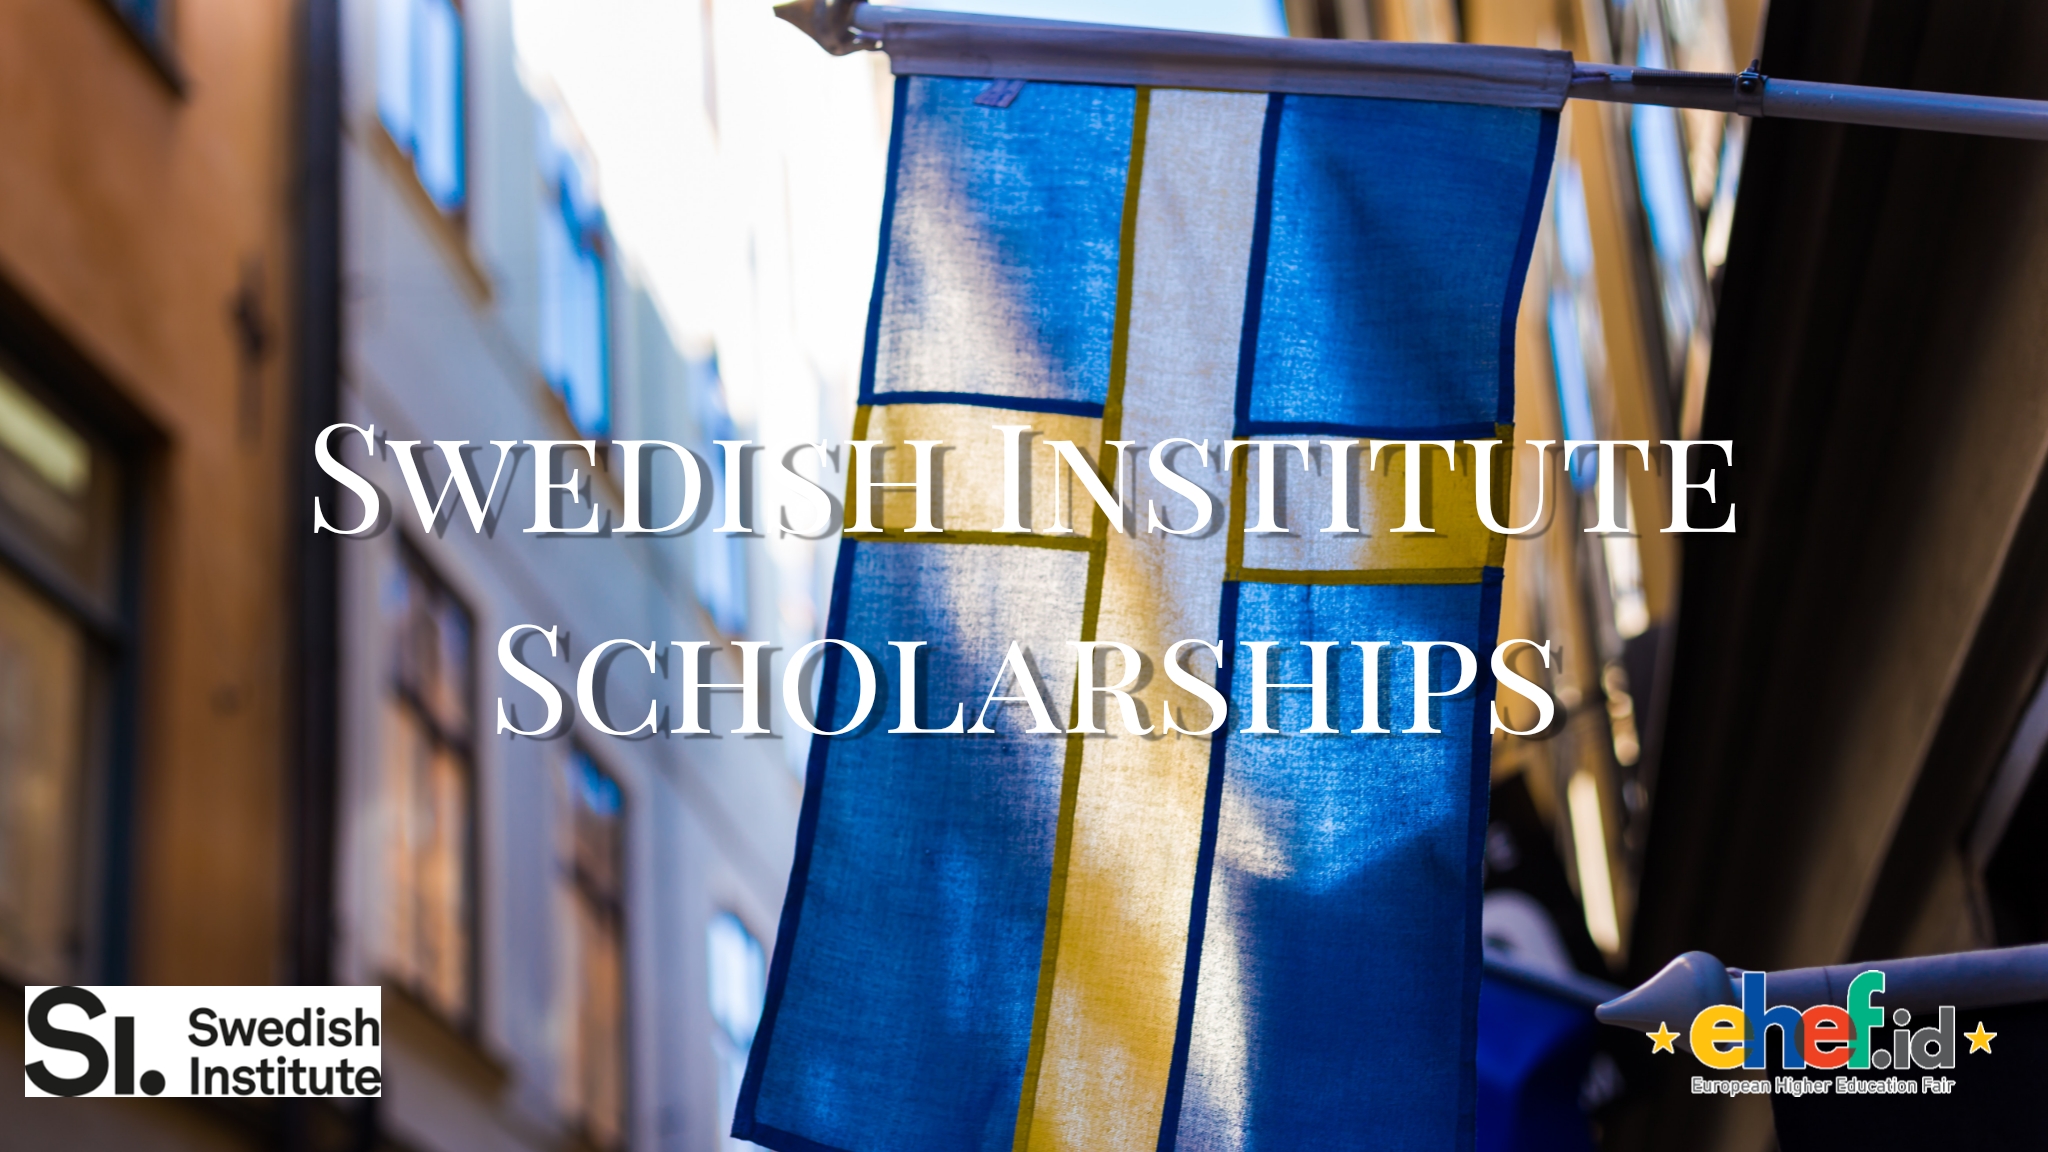 Are You Eligible for the Swedish Institute Scholarship?